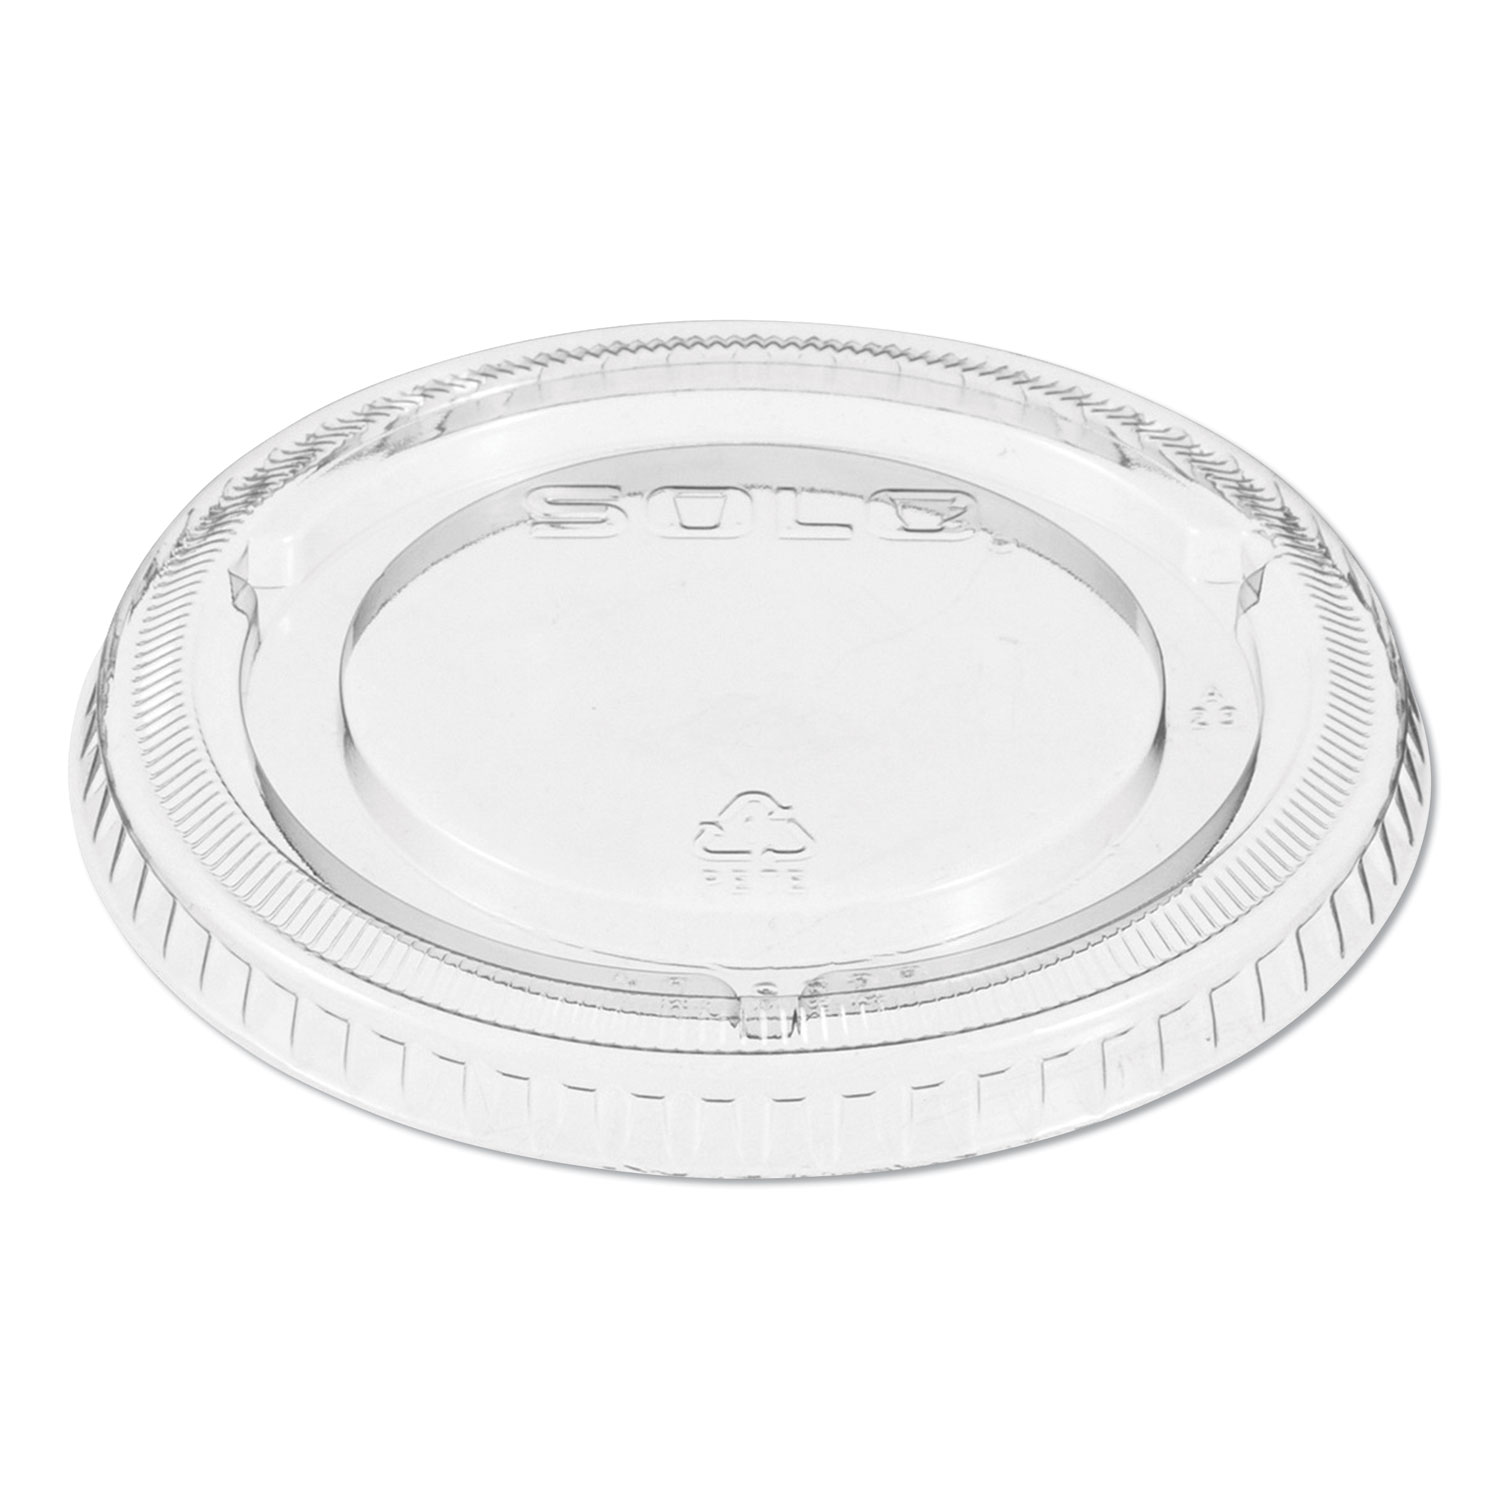 Lids for Solo Ultra Clear Cups, Fits 9-22 oz. Cups, Clear, 1000/Carton